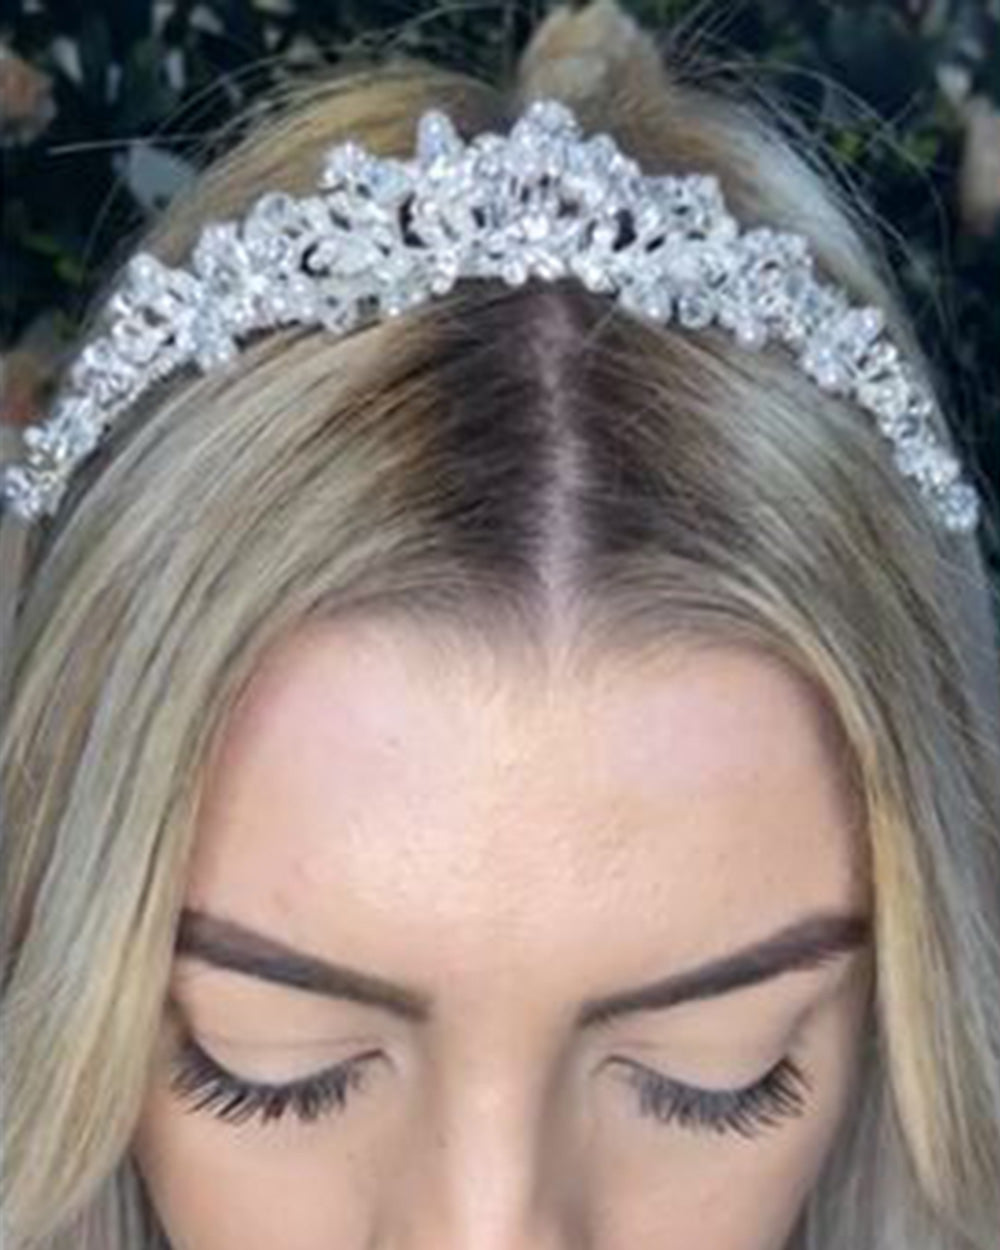 This diamante wedding tiara oozes sophistication and effortless style. Highly detailed with crystals and diamantes to create floral and leaf shapes. Decorated with stunning pearl beads for a classy and timeless design.  Why not take advantage of any and all chances to wear a tiara. If you can't wear one on your wedding day, when can you? Every bride deserves to feel like a true princess on their big day. So, complete your bridal look with one of our beautiful wedding tiaras.